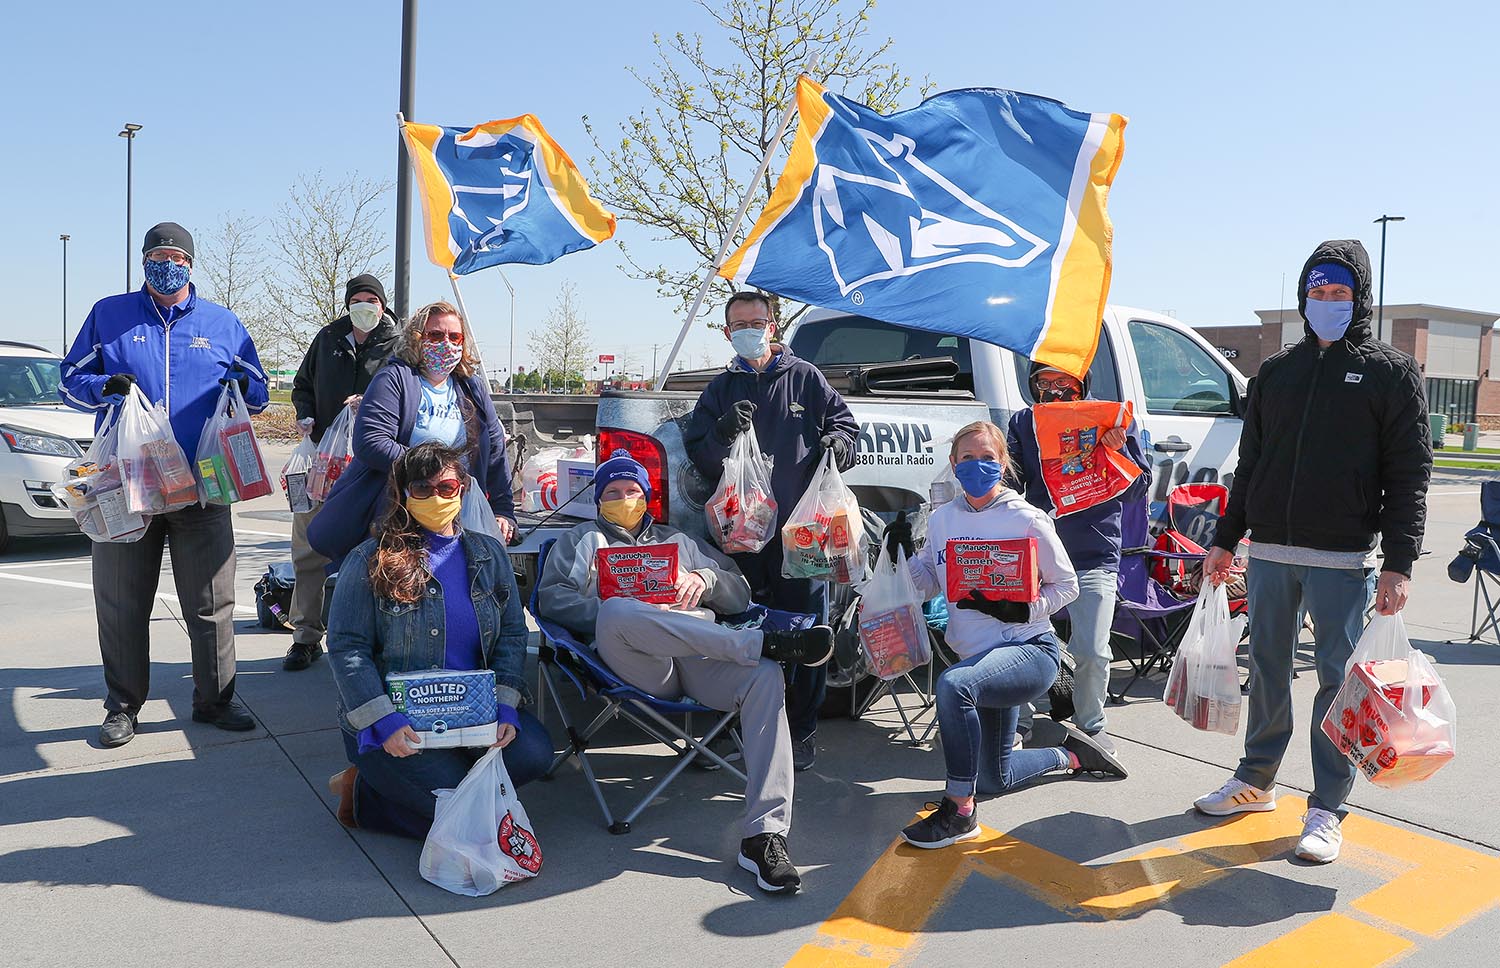 Staff from UNK Athletics and KRVN Radio collected items for Big Blue Cupboard on Friday during the “Lopers Love to Help” food drive. Community members donated enough items to fill three pickup truck beds. (Photos by Corbey R. Dorsey, UNK Communications)